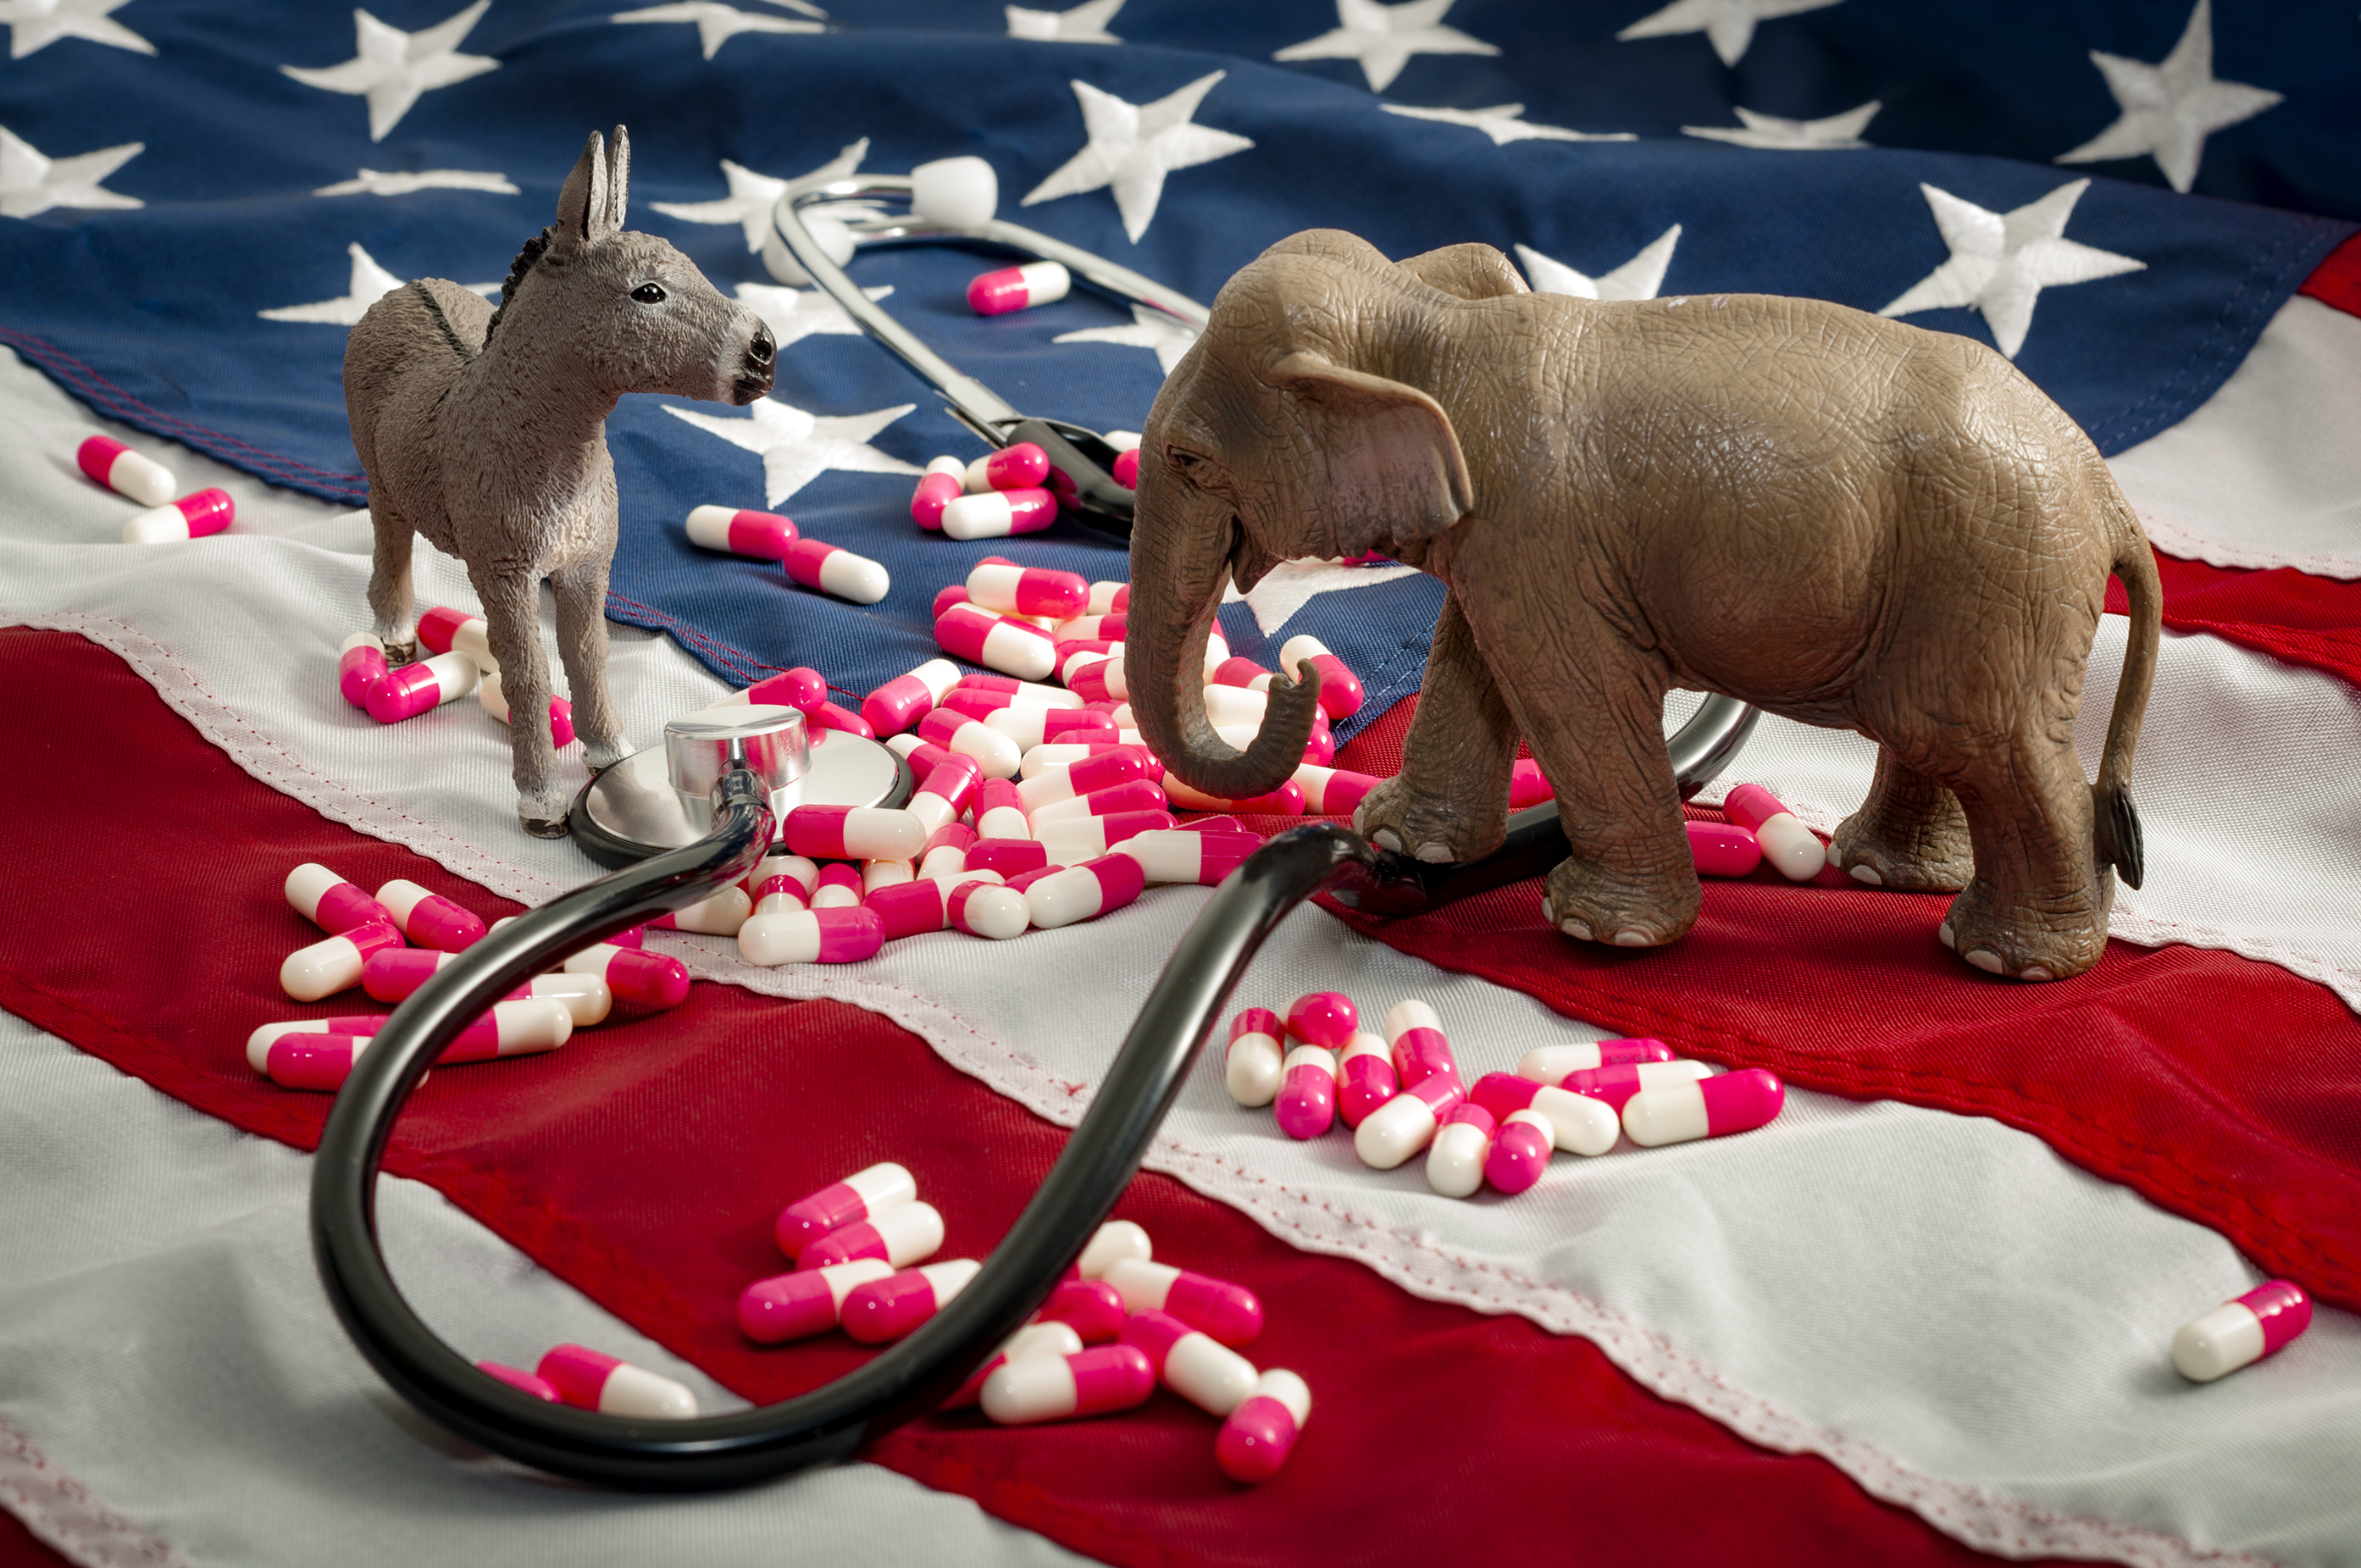 Donkey and elephant figurines face each other with stethoscope and pills with American flag in background